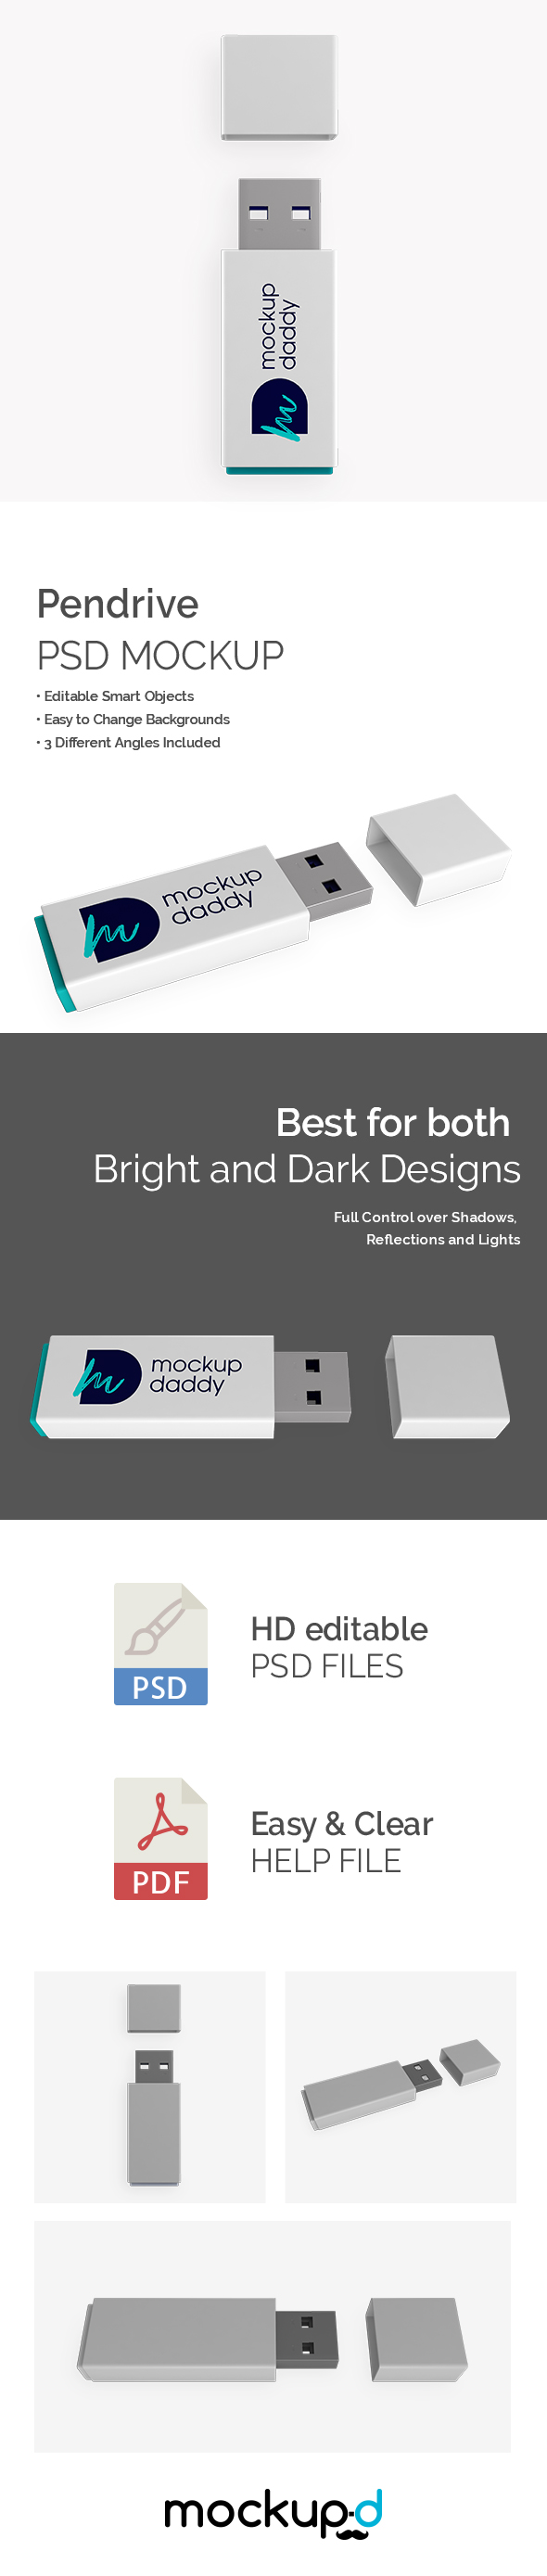 Pendrive Mockup Featured